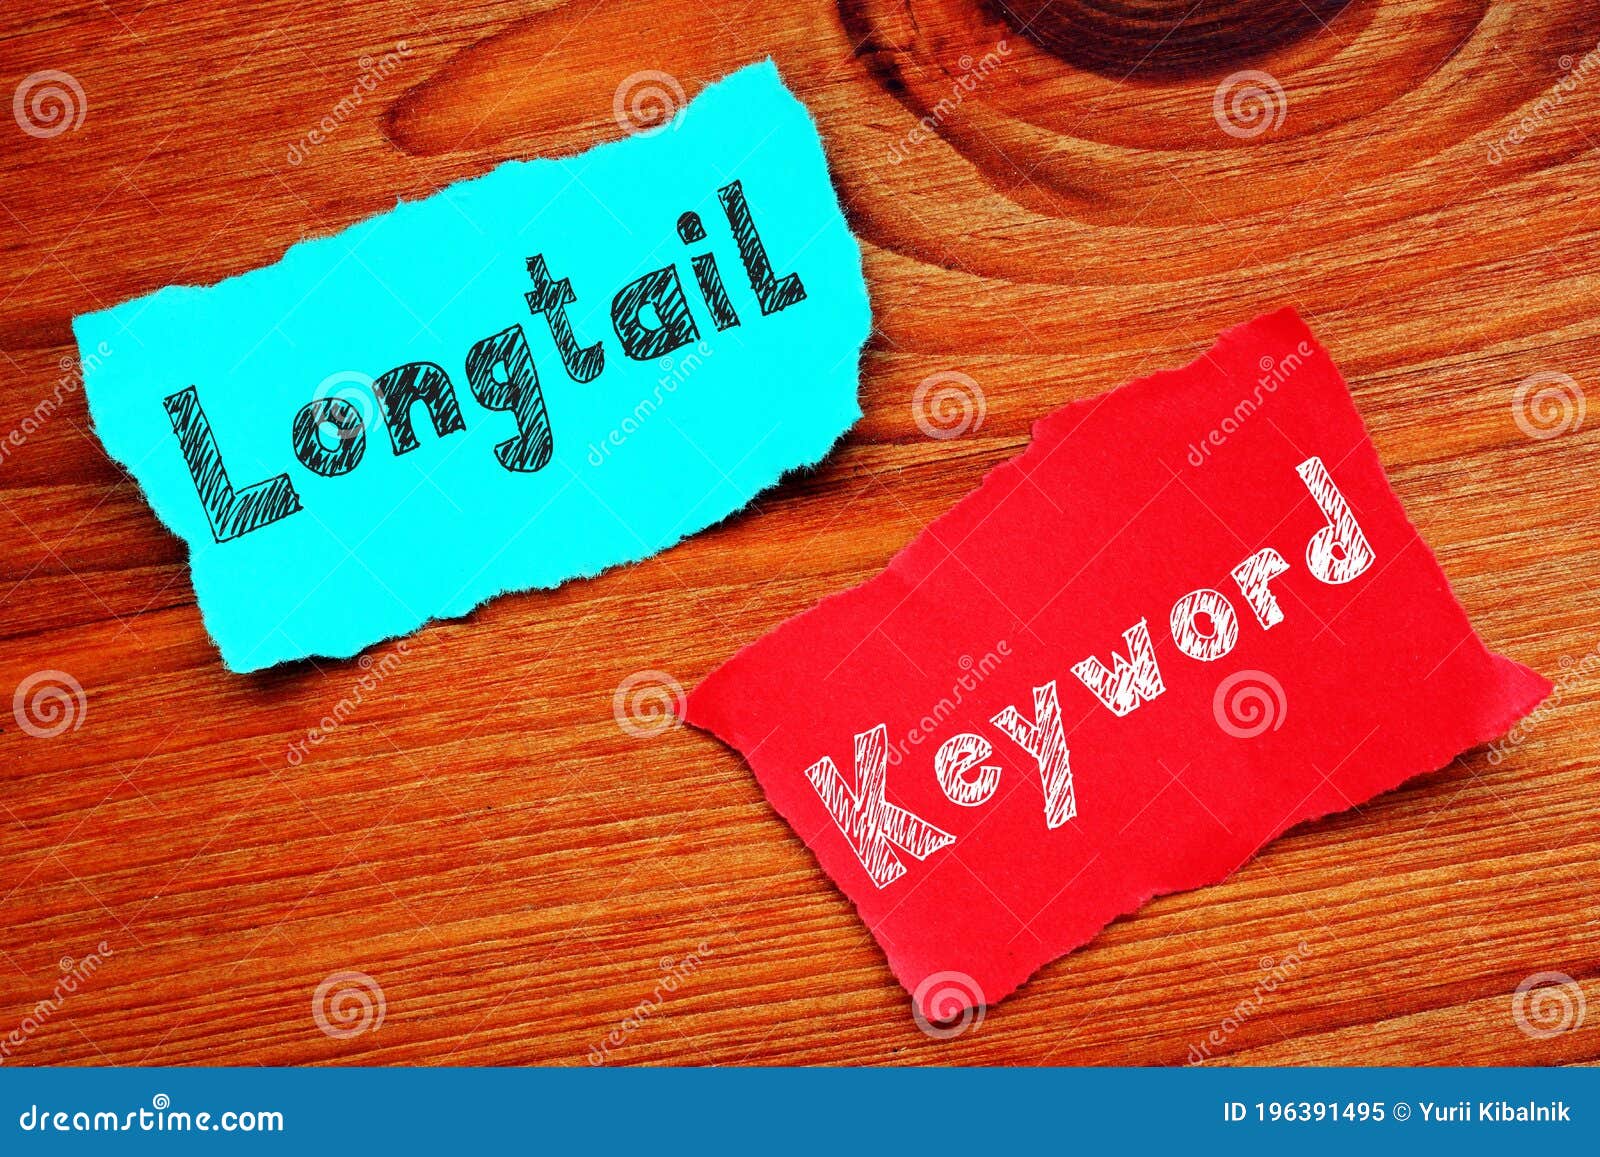 business concept meaning longtail keyword with inscription on the piece of paper stock image image of action profit 196391495